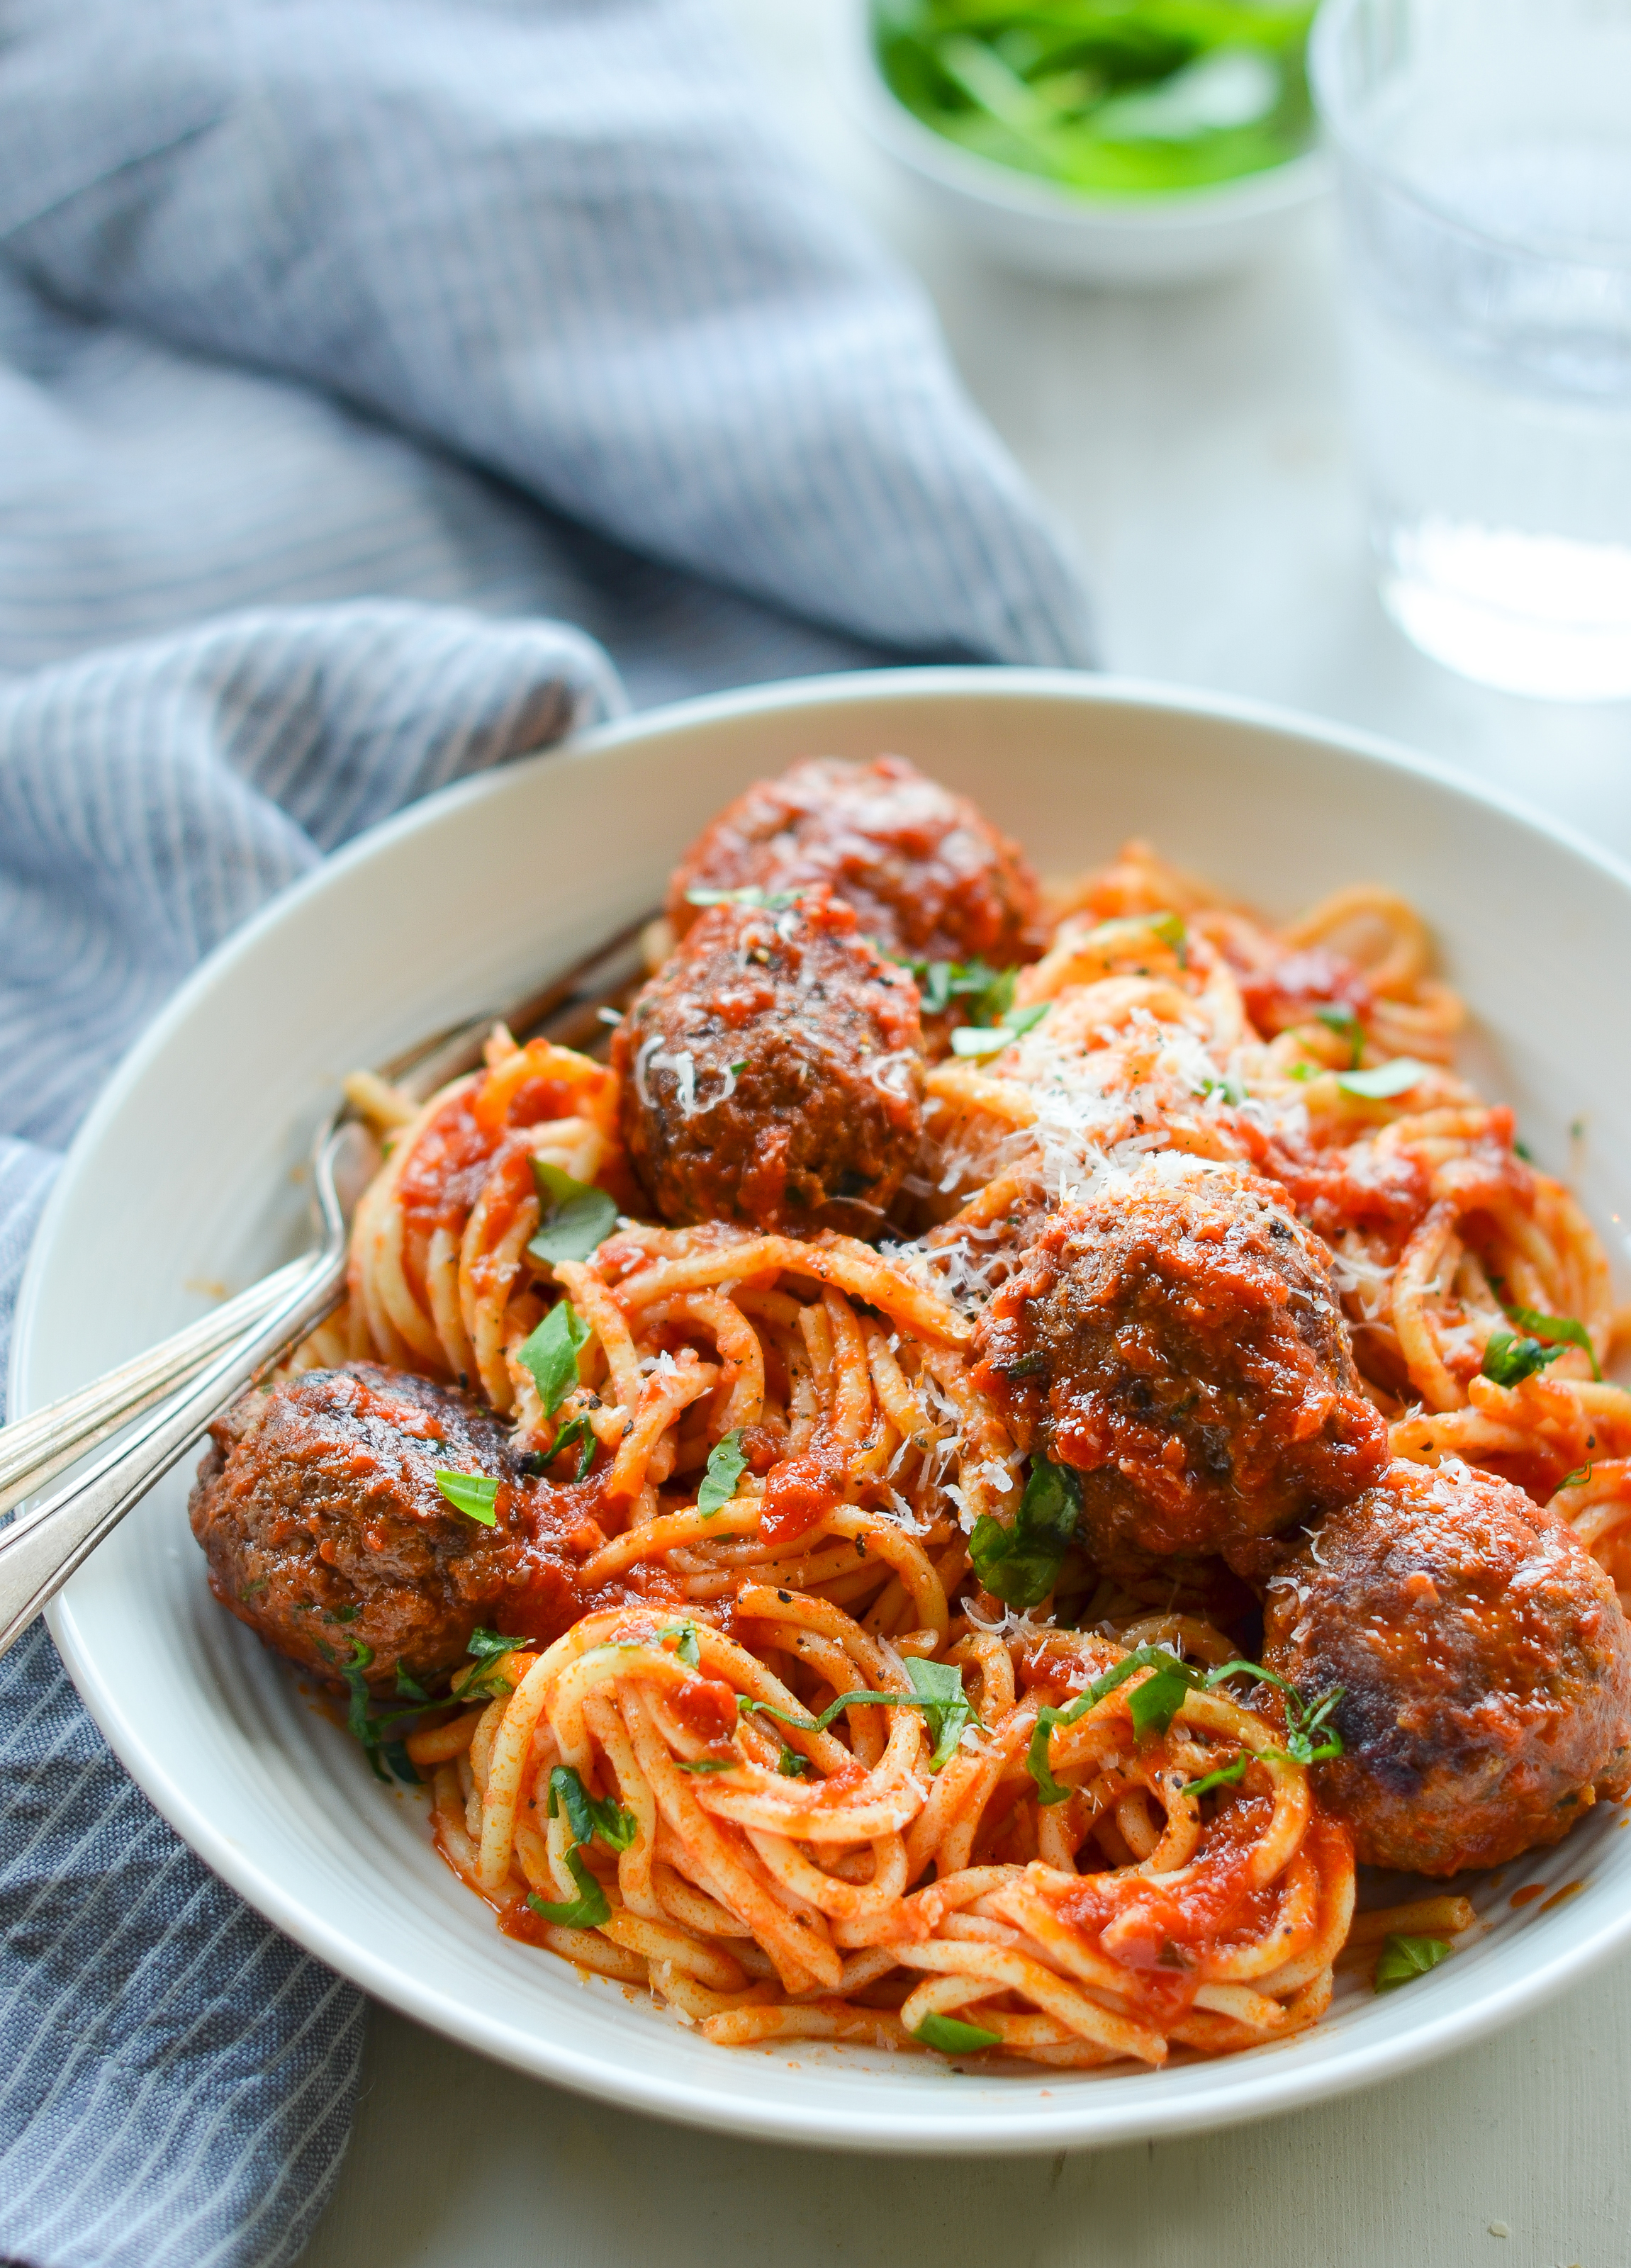 Easy Spaghetti And Meatball Recipe Once Upon A Chef,English Ivy Indoors